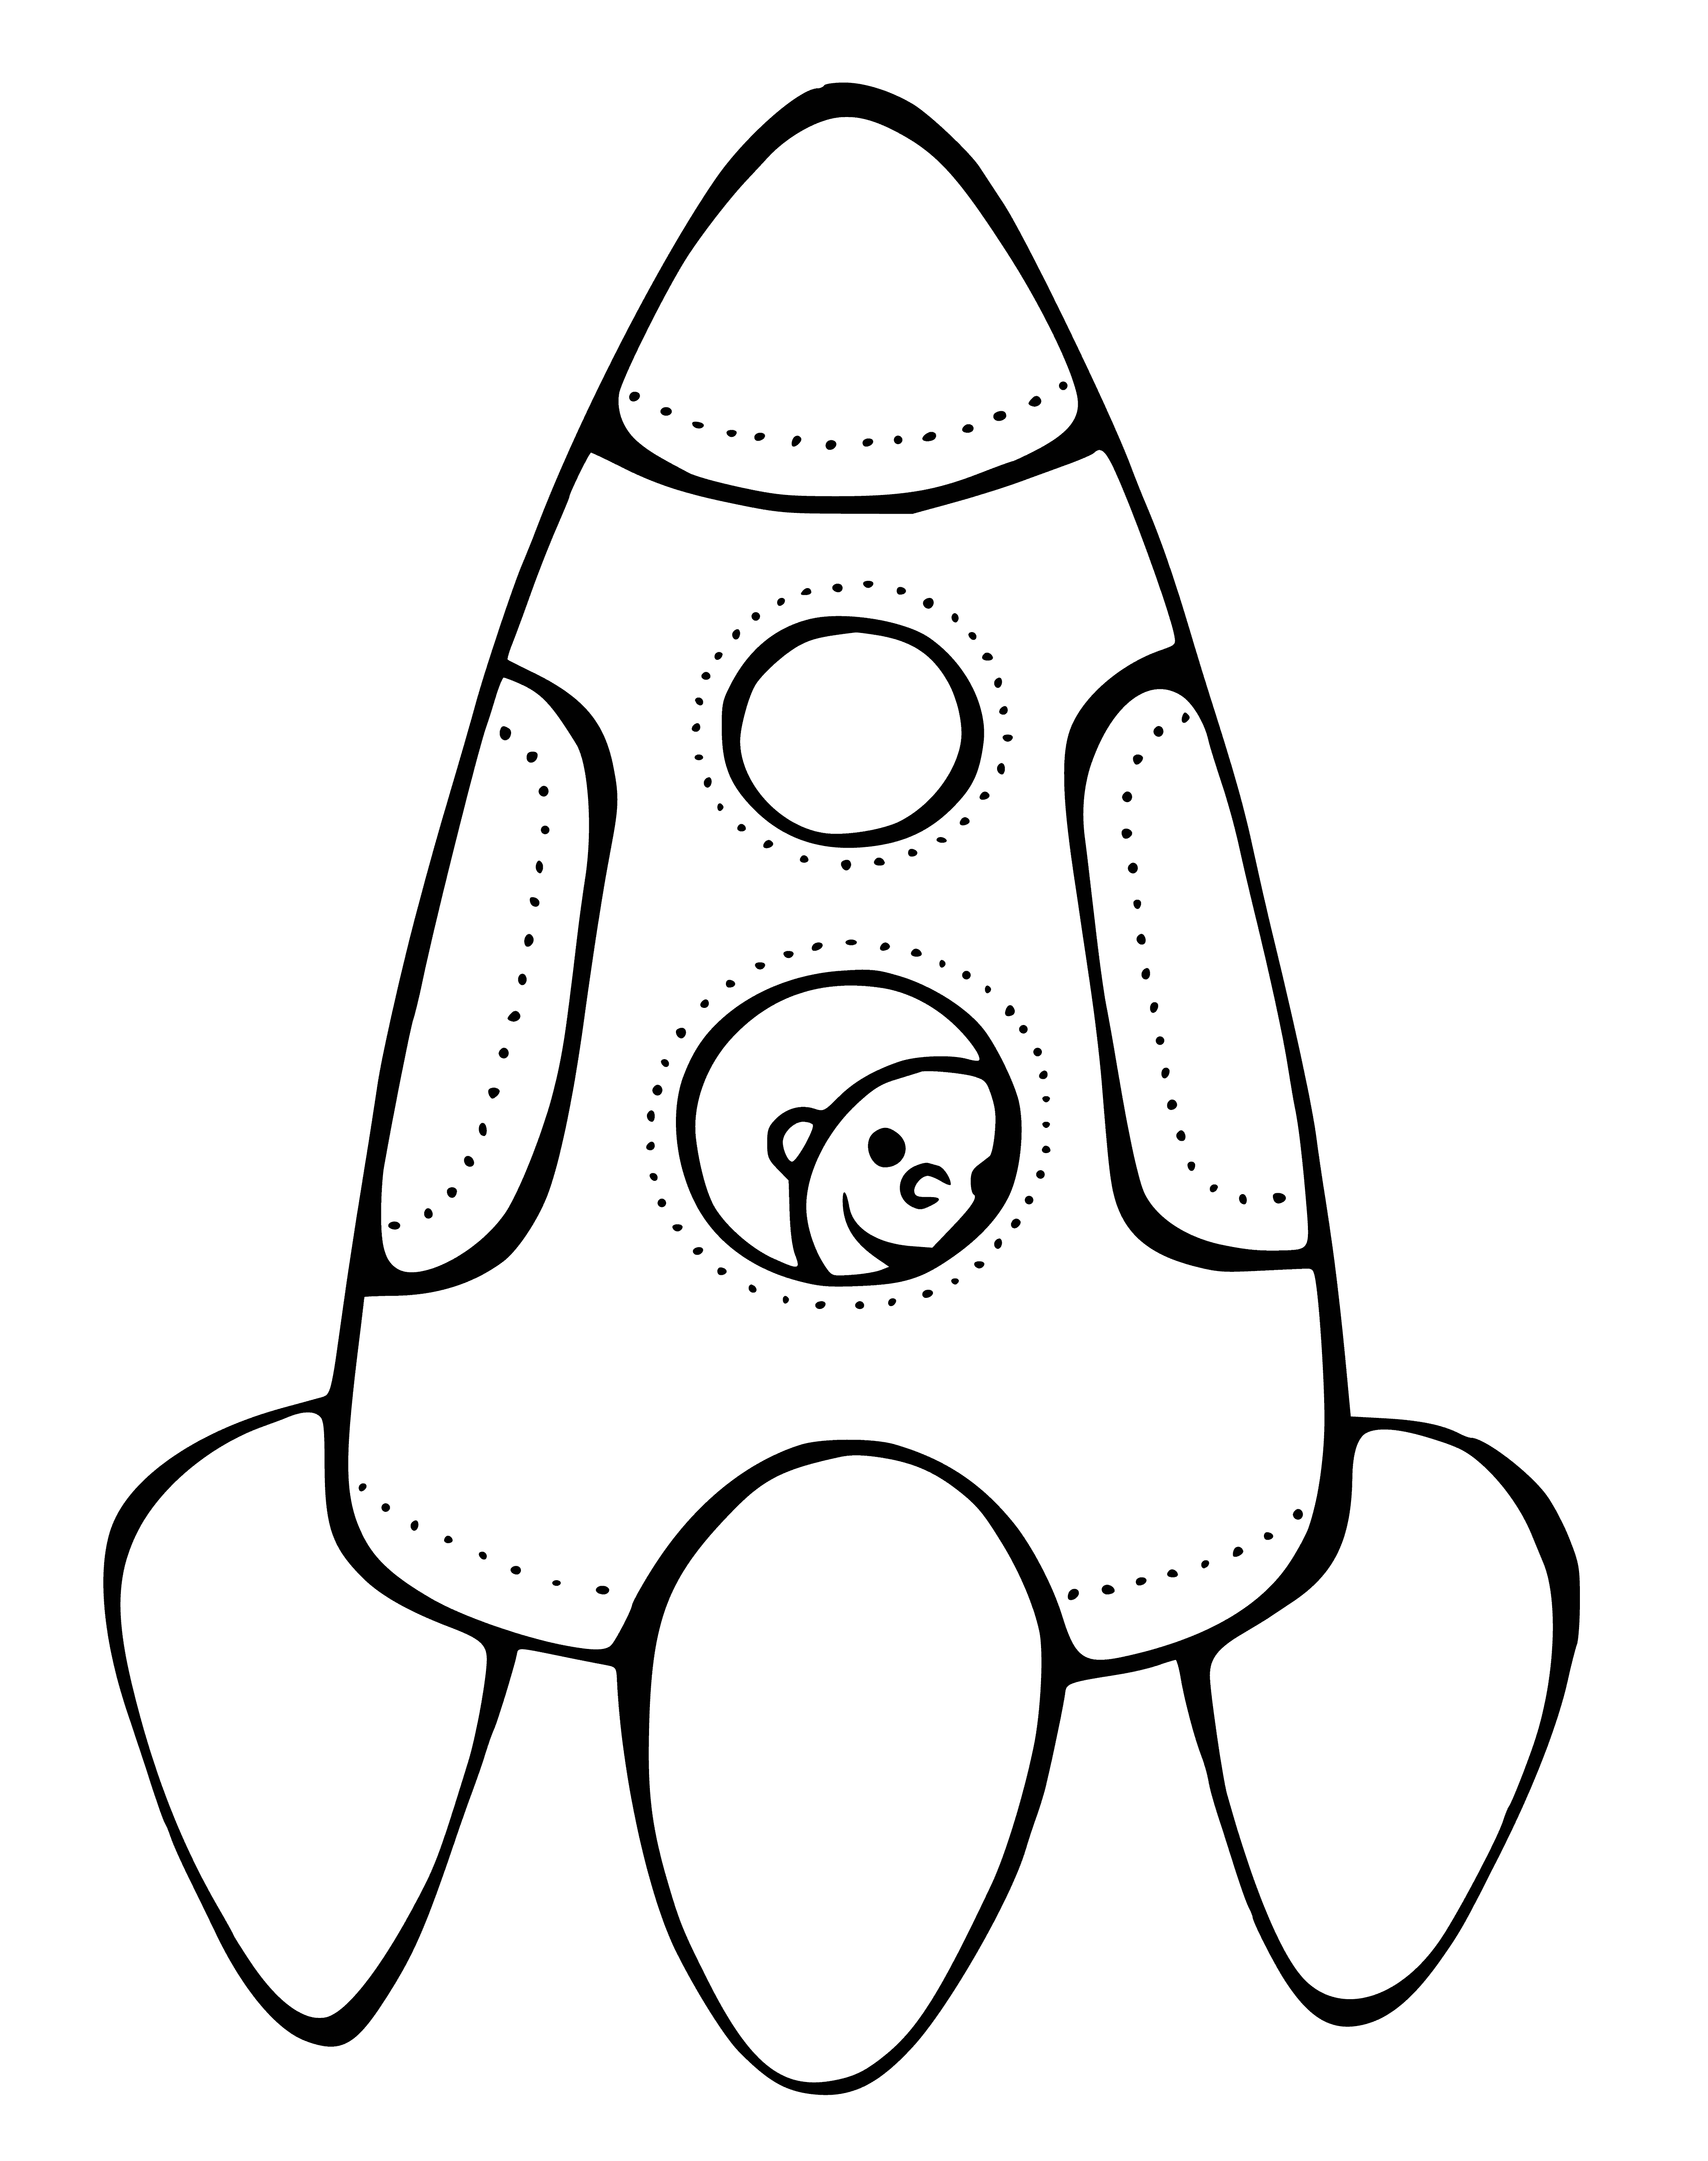 coloring page: Rocket transport has a large round cylindrical object w/ pointed end sitting on flat surface surrounded by small round objects & metal rods.